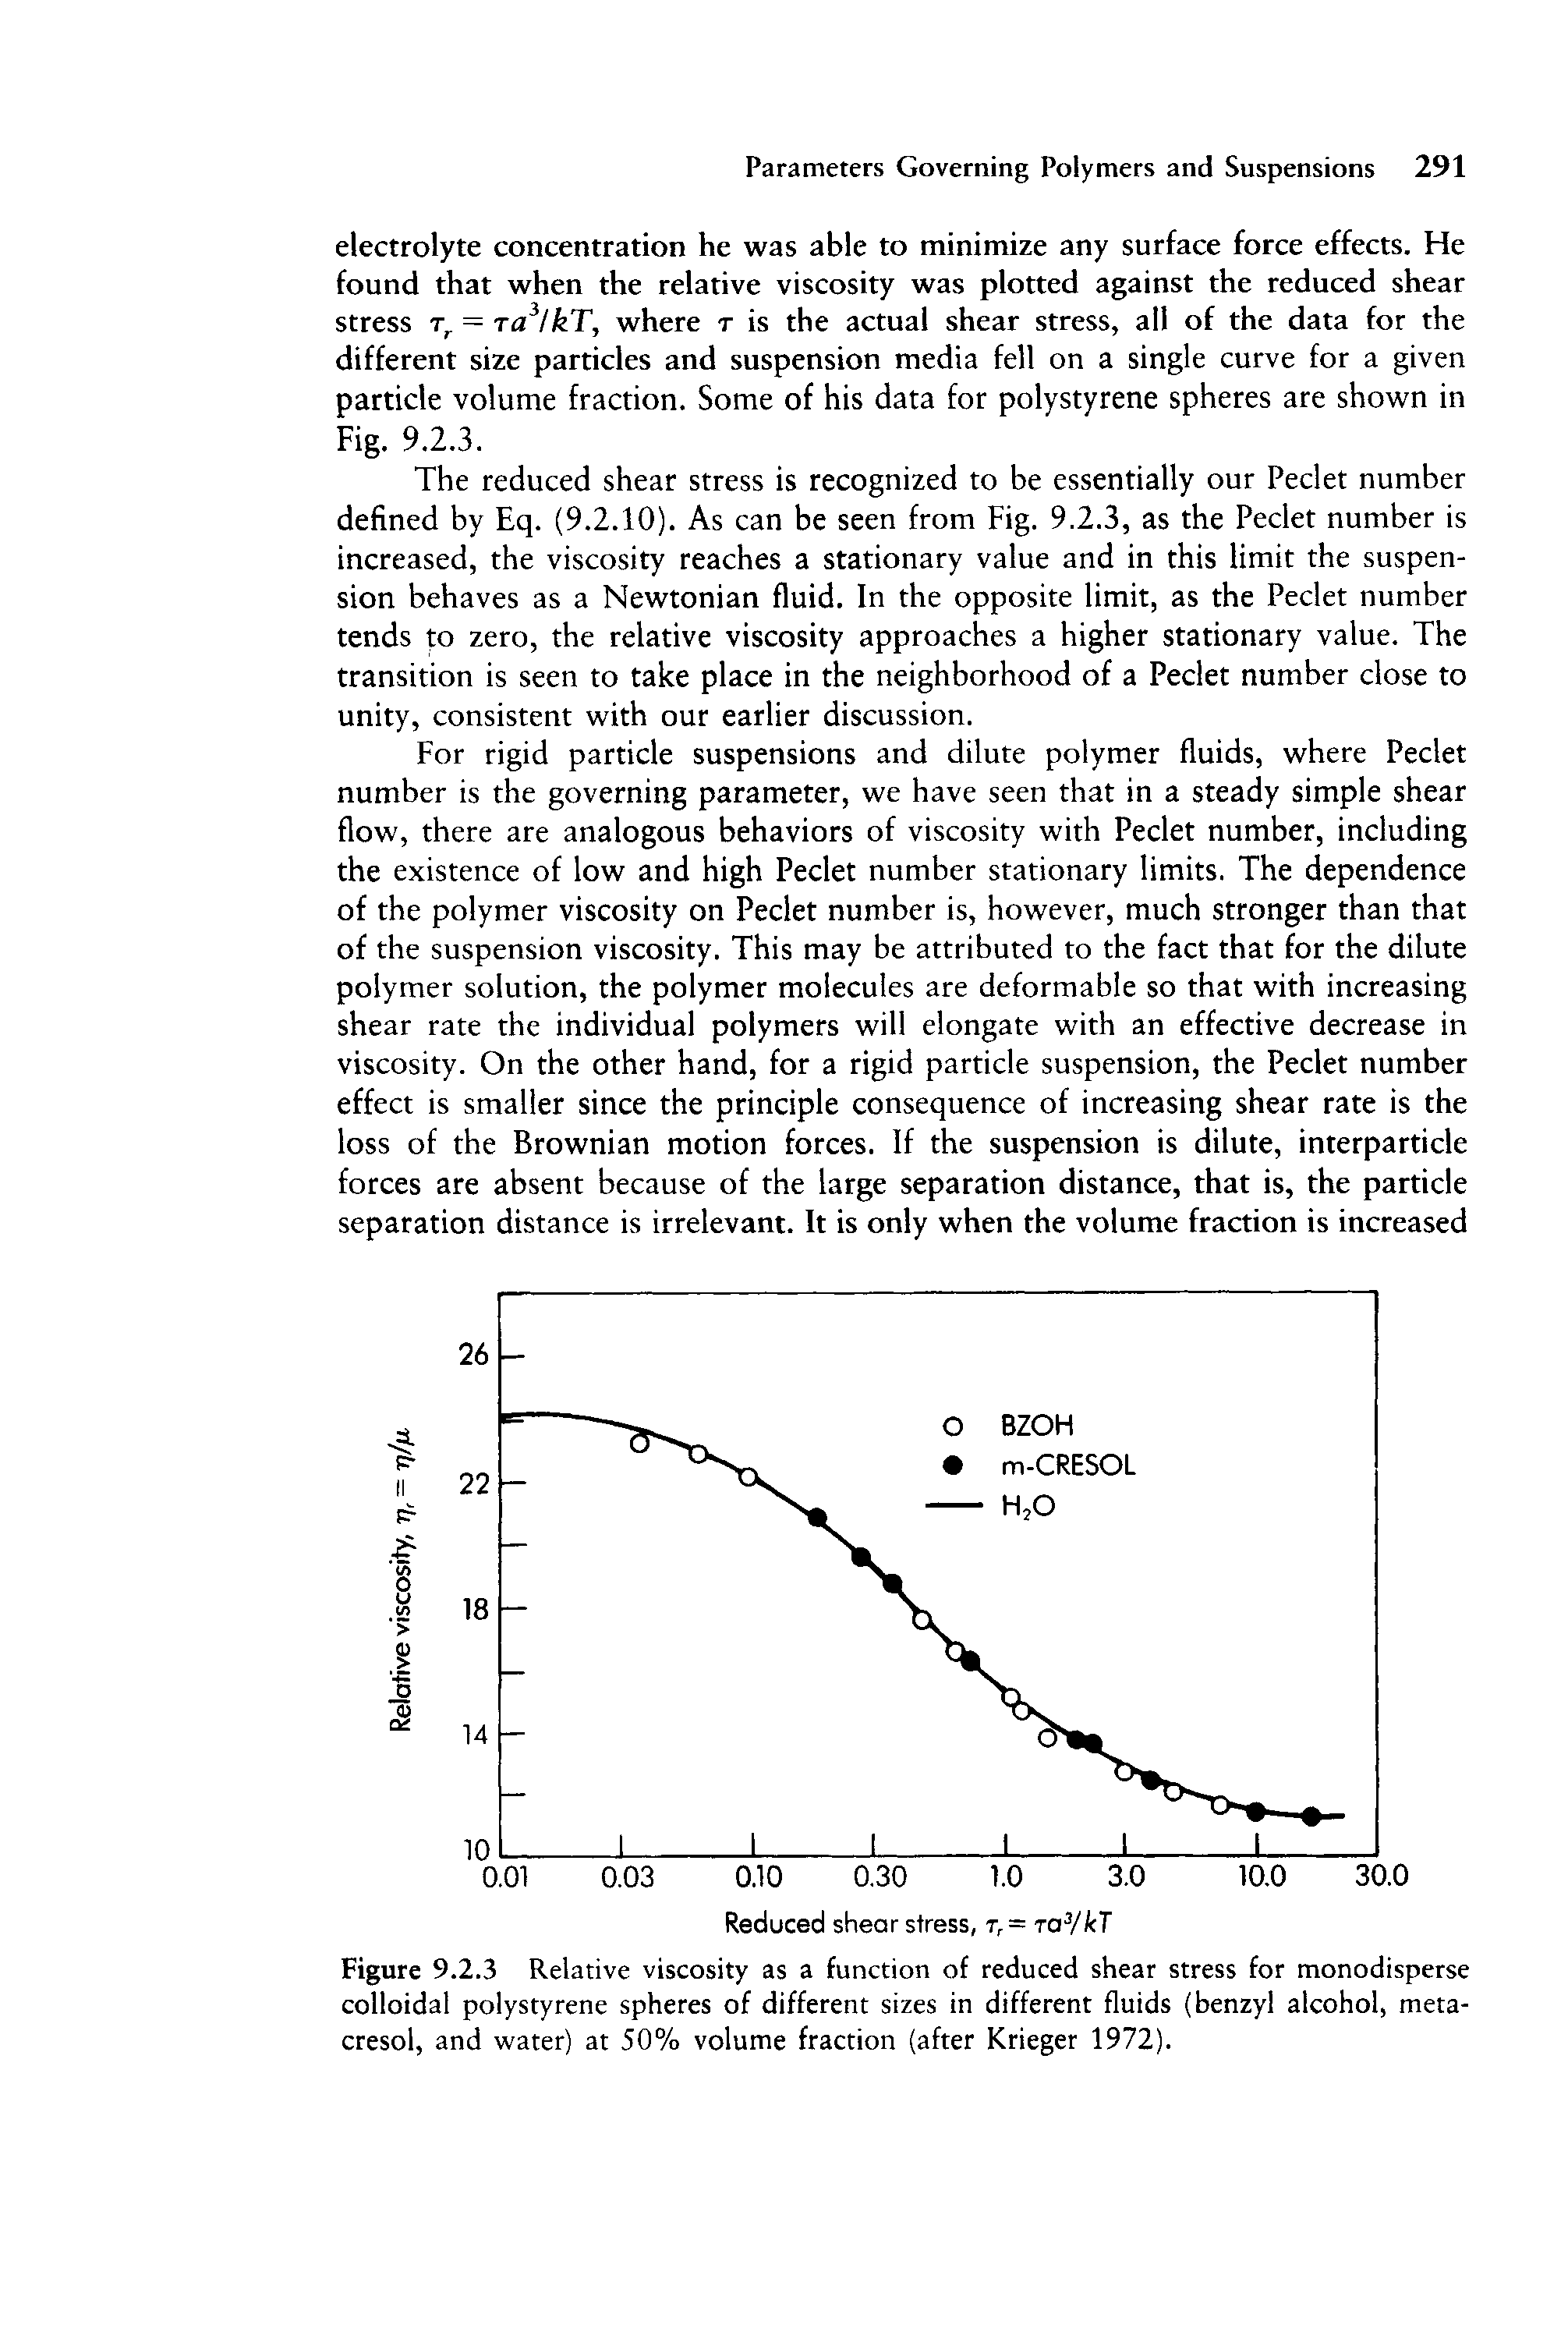 Figure 9.2.3 Relative viscosity as a function of reduced shear stress for monodisperse colloidal polystyrene spheres of different sizes in different fluids (benzyl alcohol, meta-cresol, and water) at 50% volume fraction (after Krieger 1972).